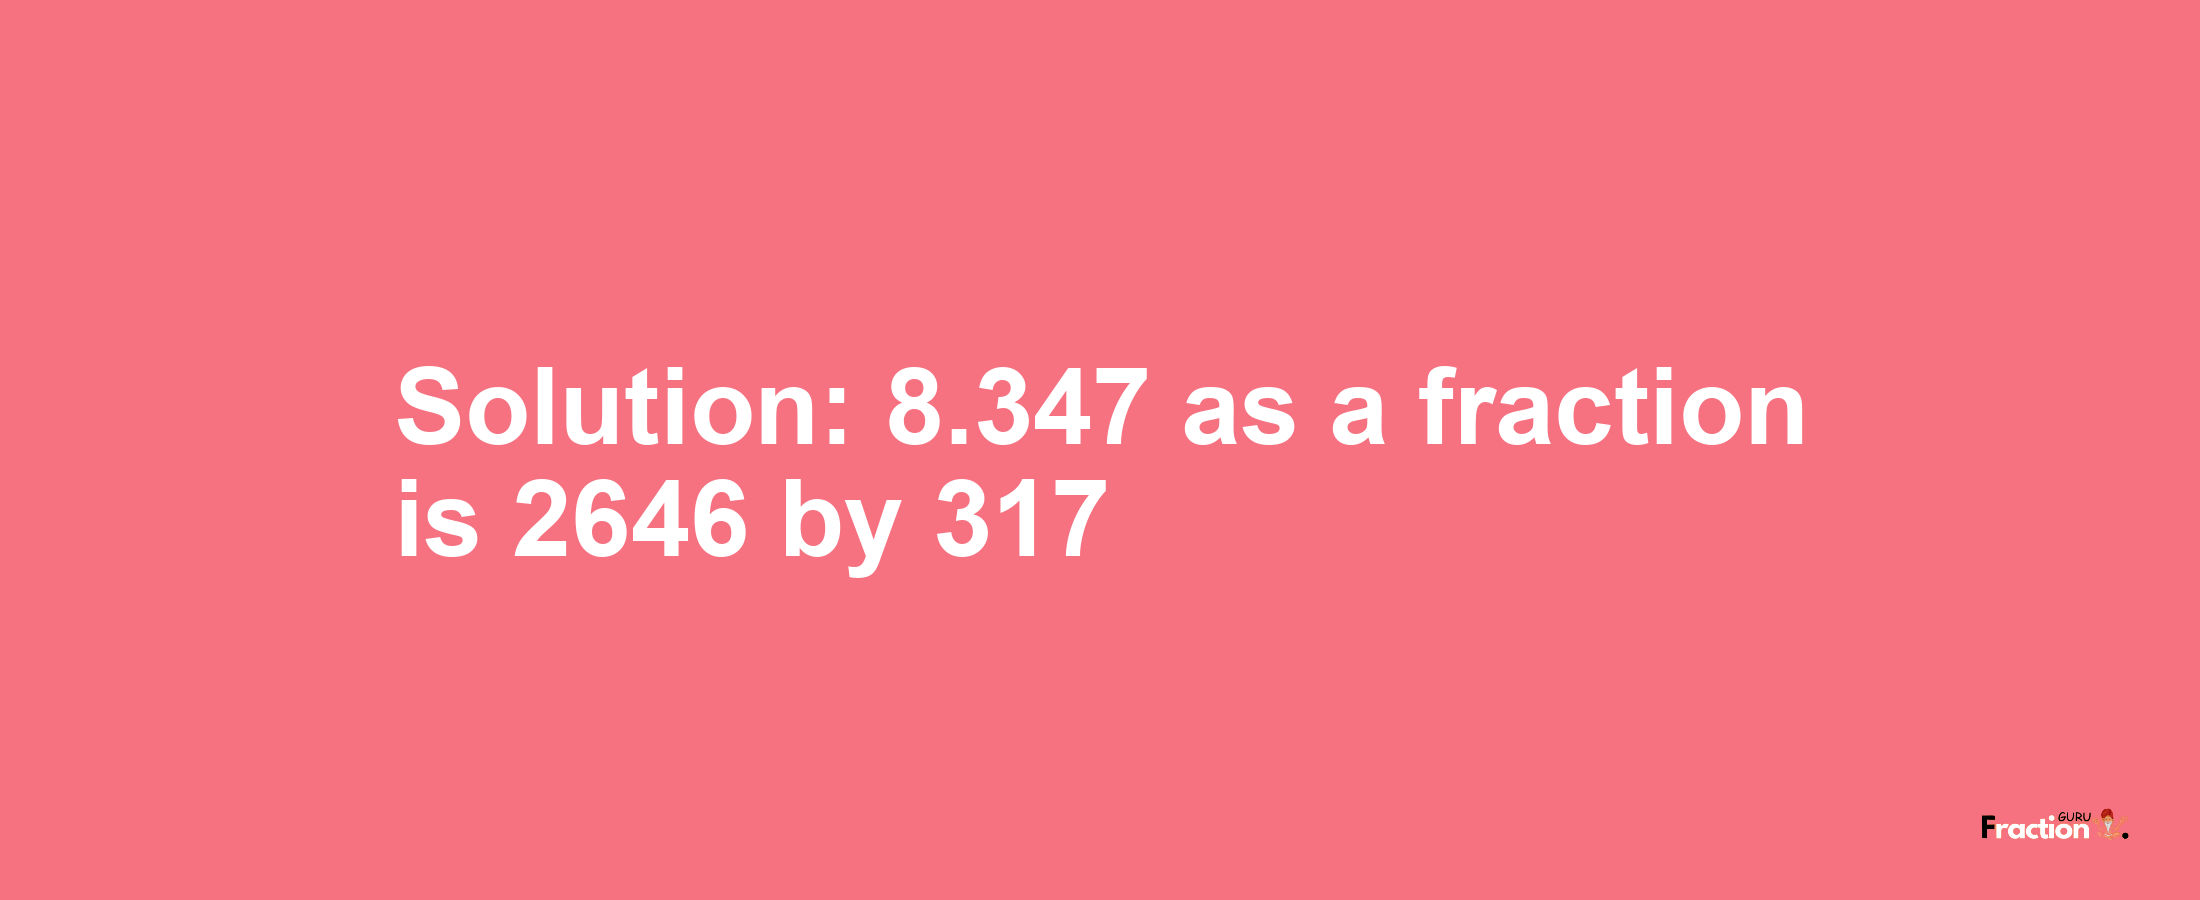 Solution:8.347 as a fraction is 2646/317